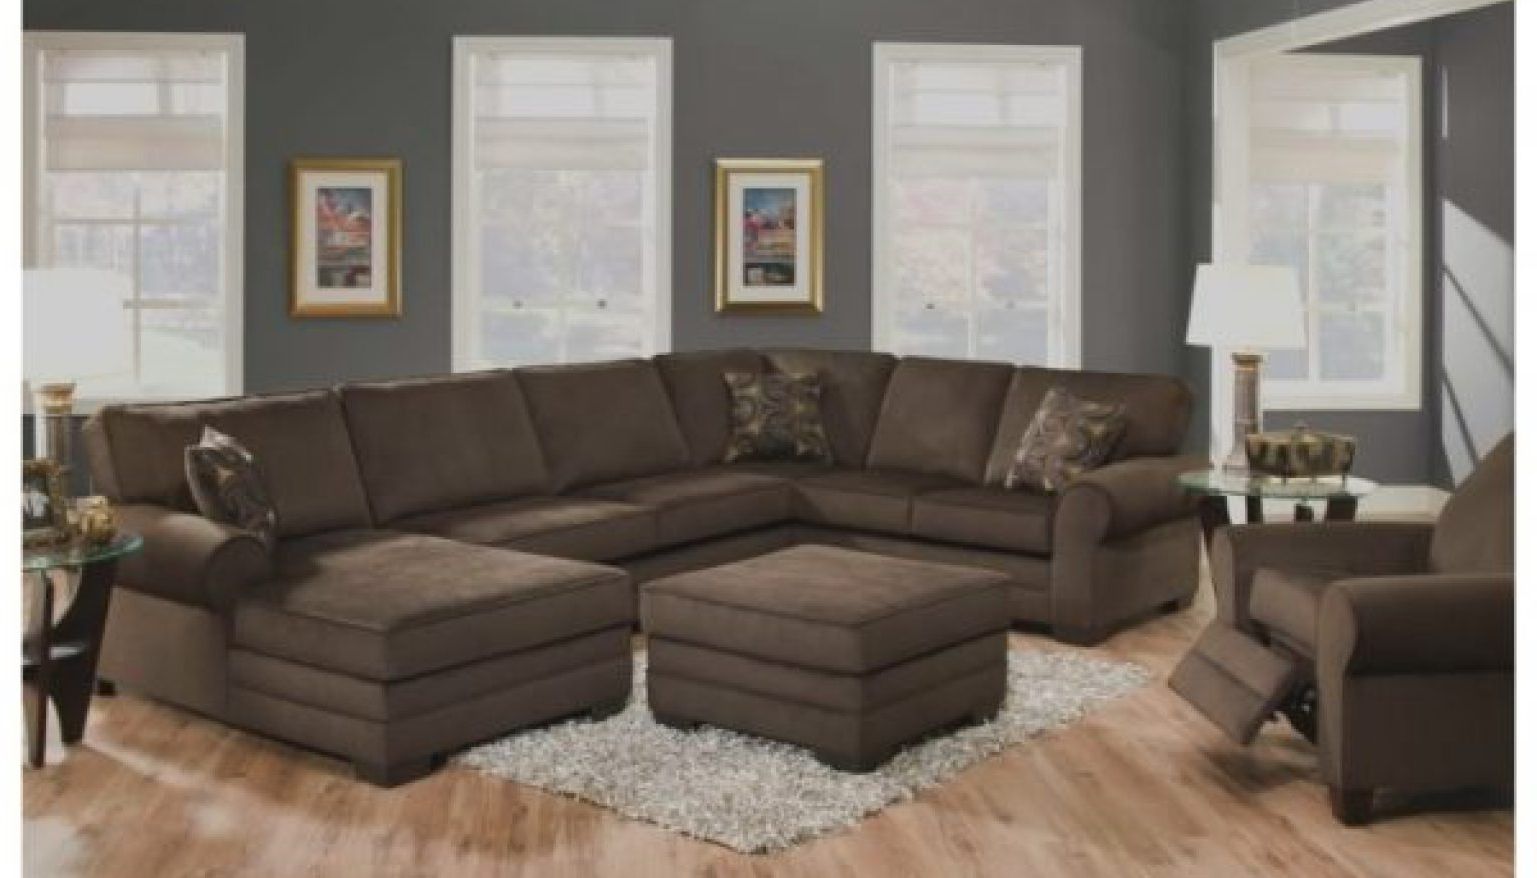 Tampa Fl Sectional Sofas Throughout Well Liked Awesome Sectional Sofas Tampa Fl – Buildsimplehome (View 11 of 15)